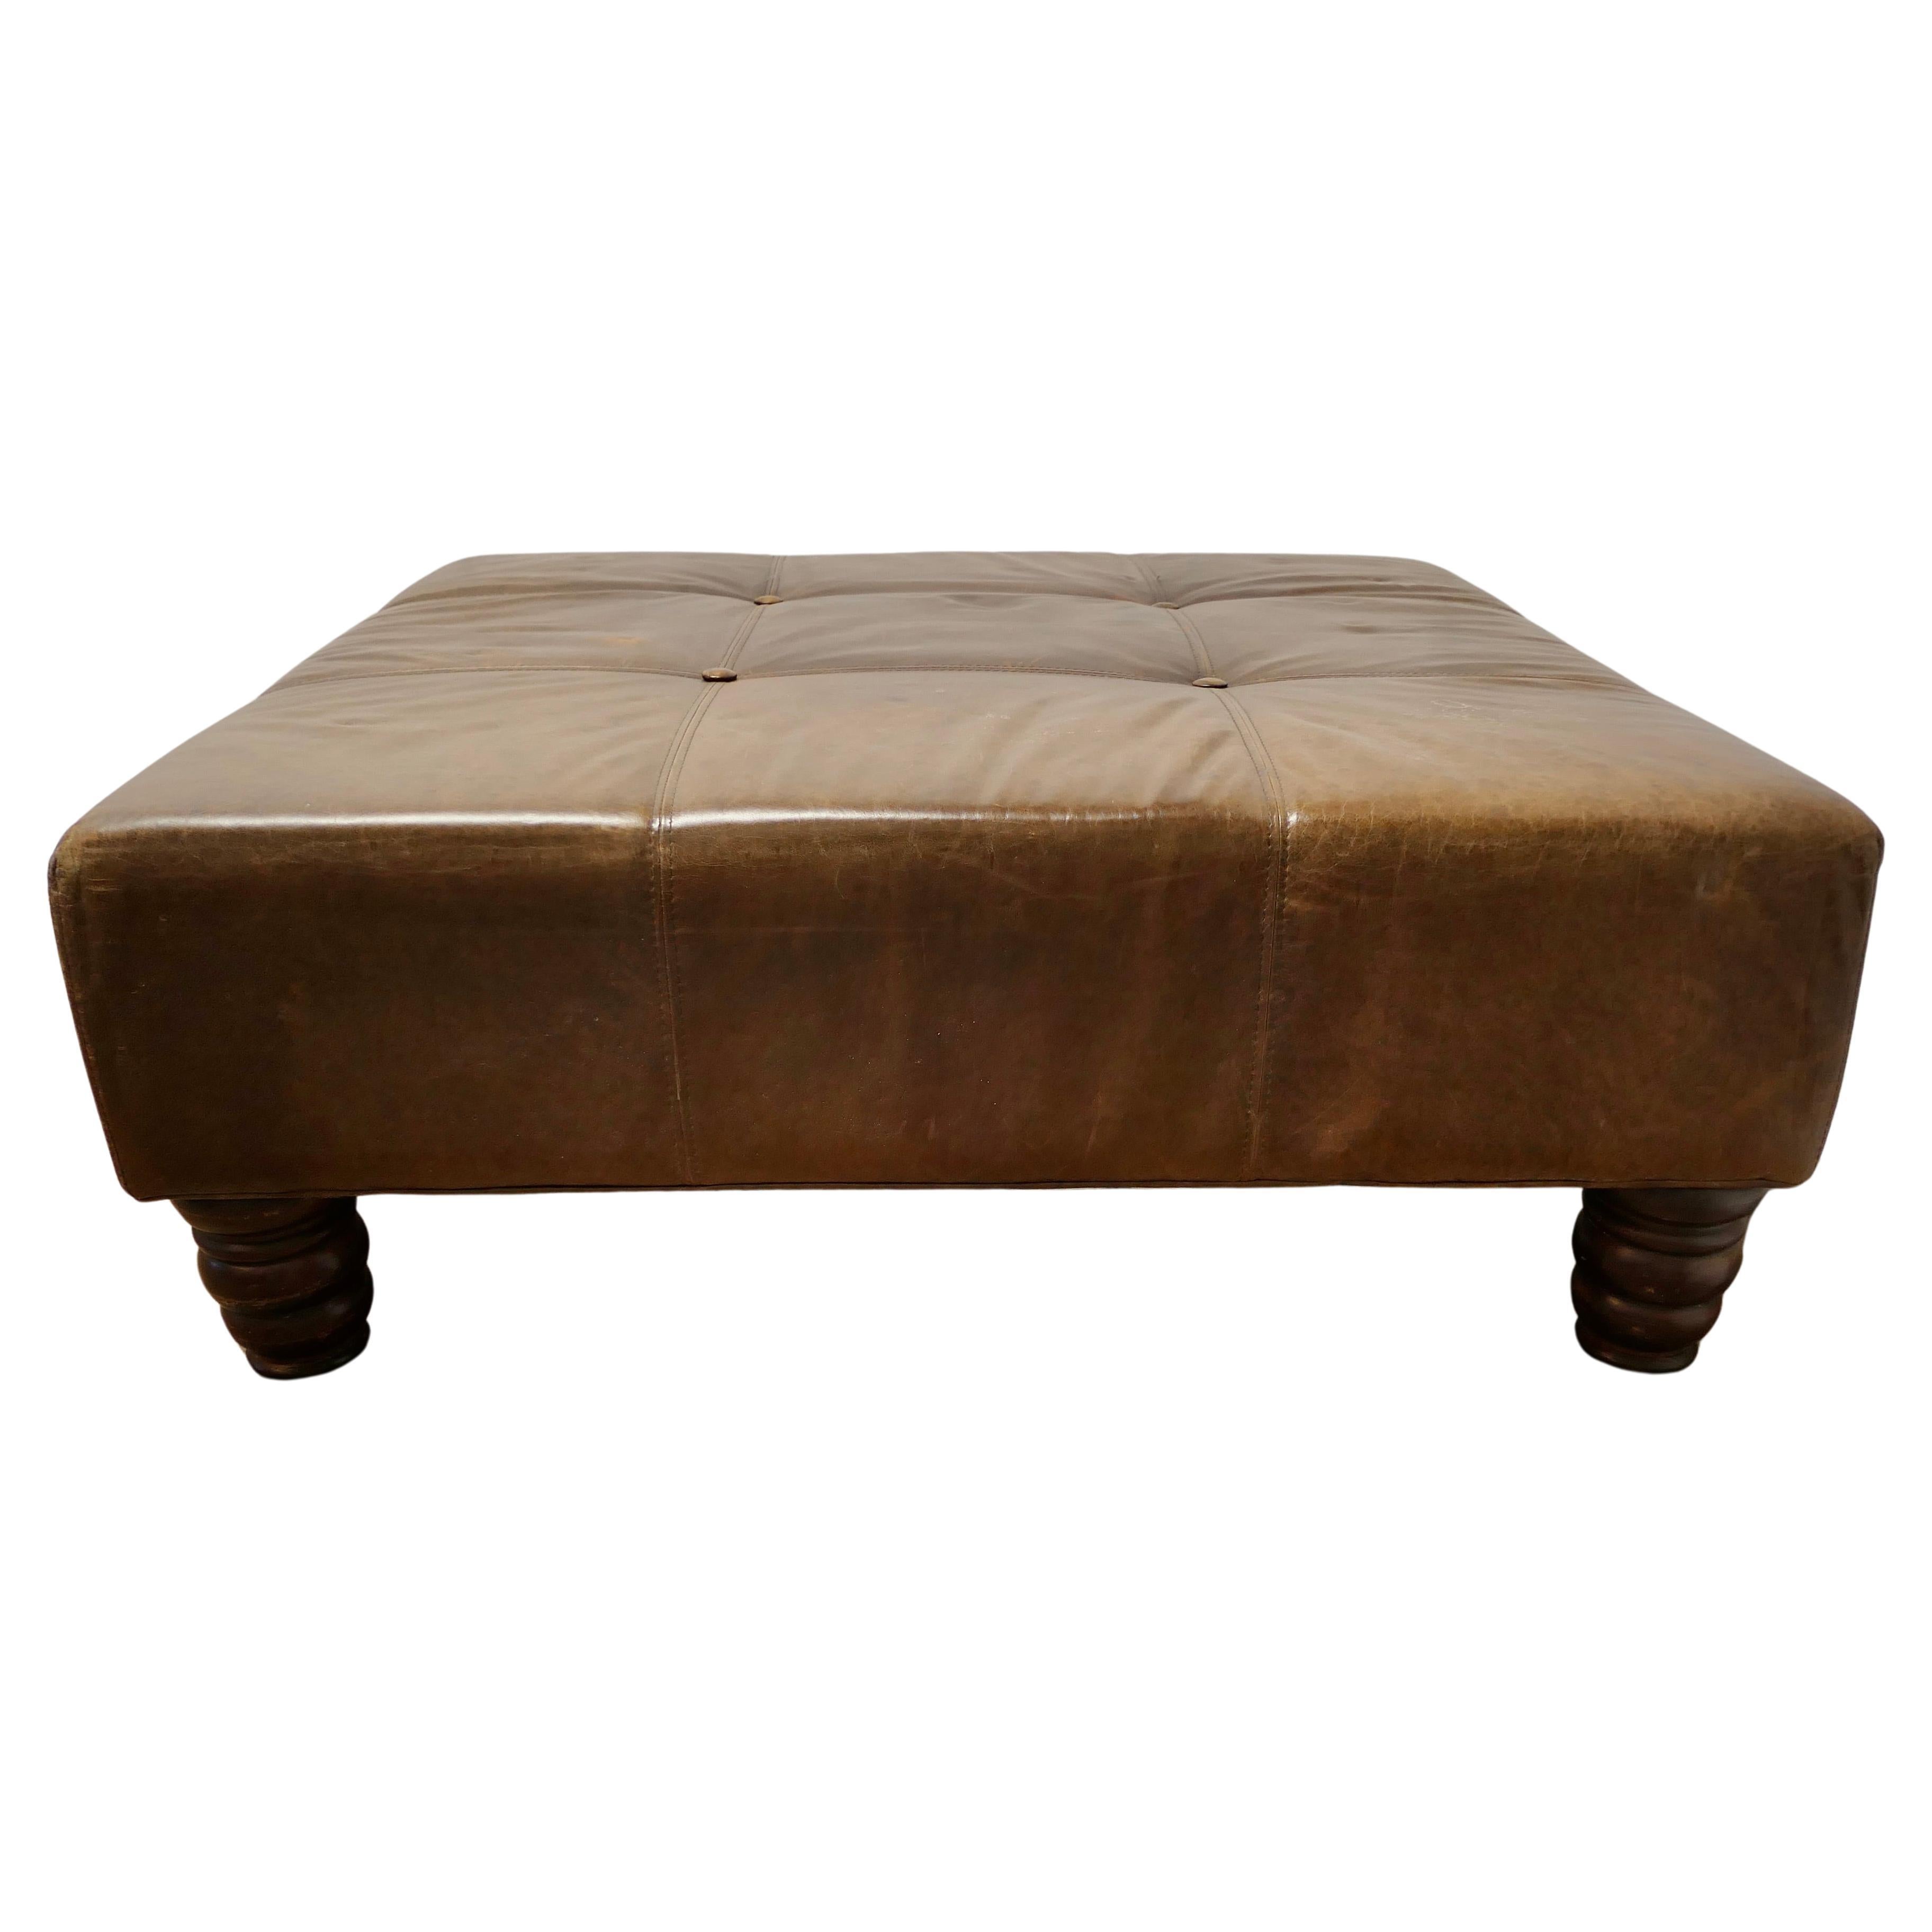 Extra Large Leather Chesterfield Ottoman Seat or Centre Coffee Table   This is a